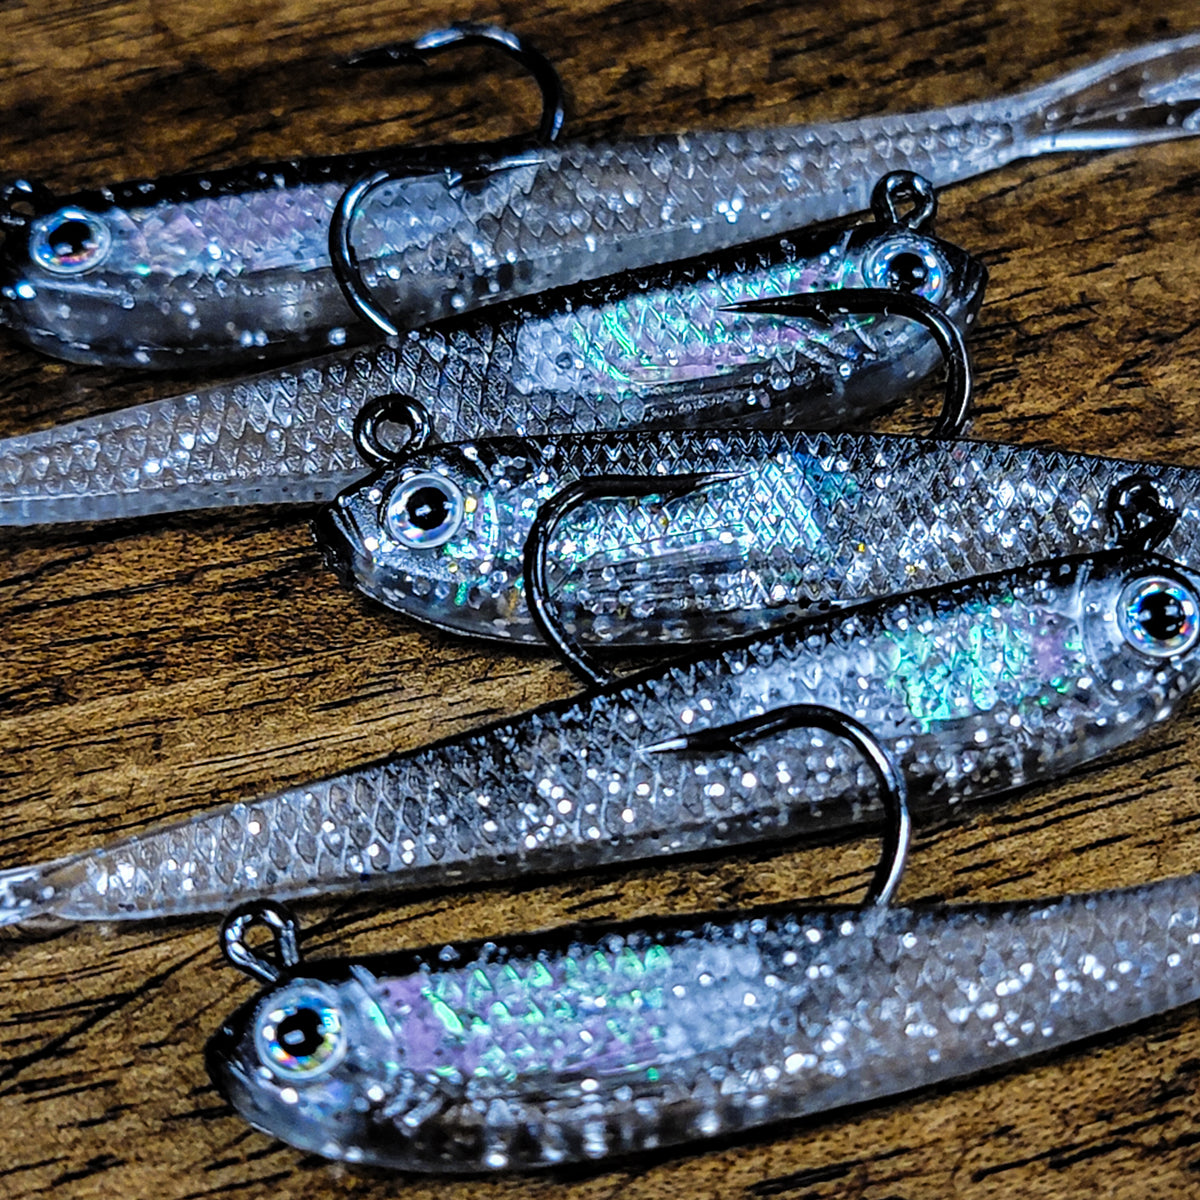 Weighted Toxic Hooker Minnow 2.75" (5pk)